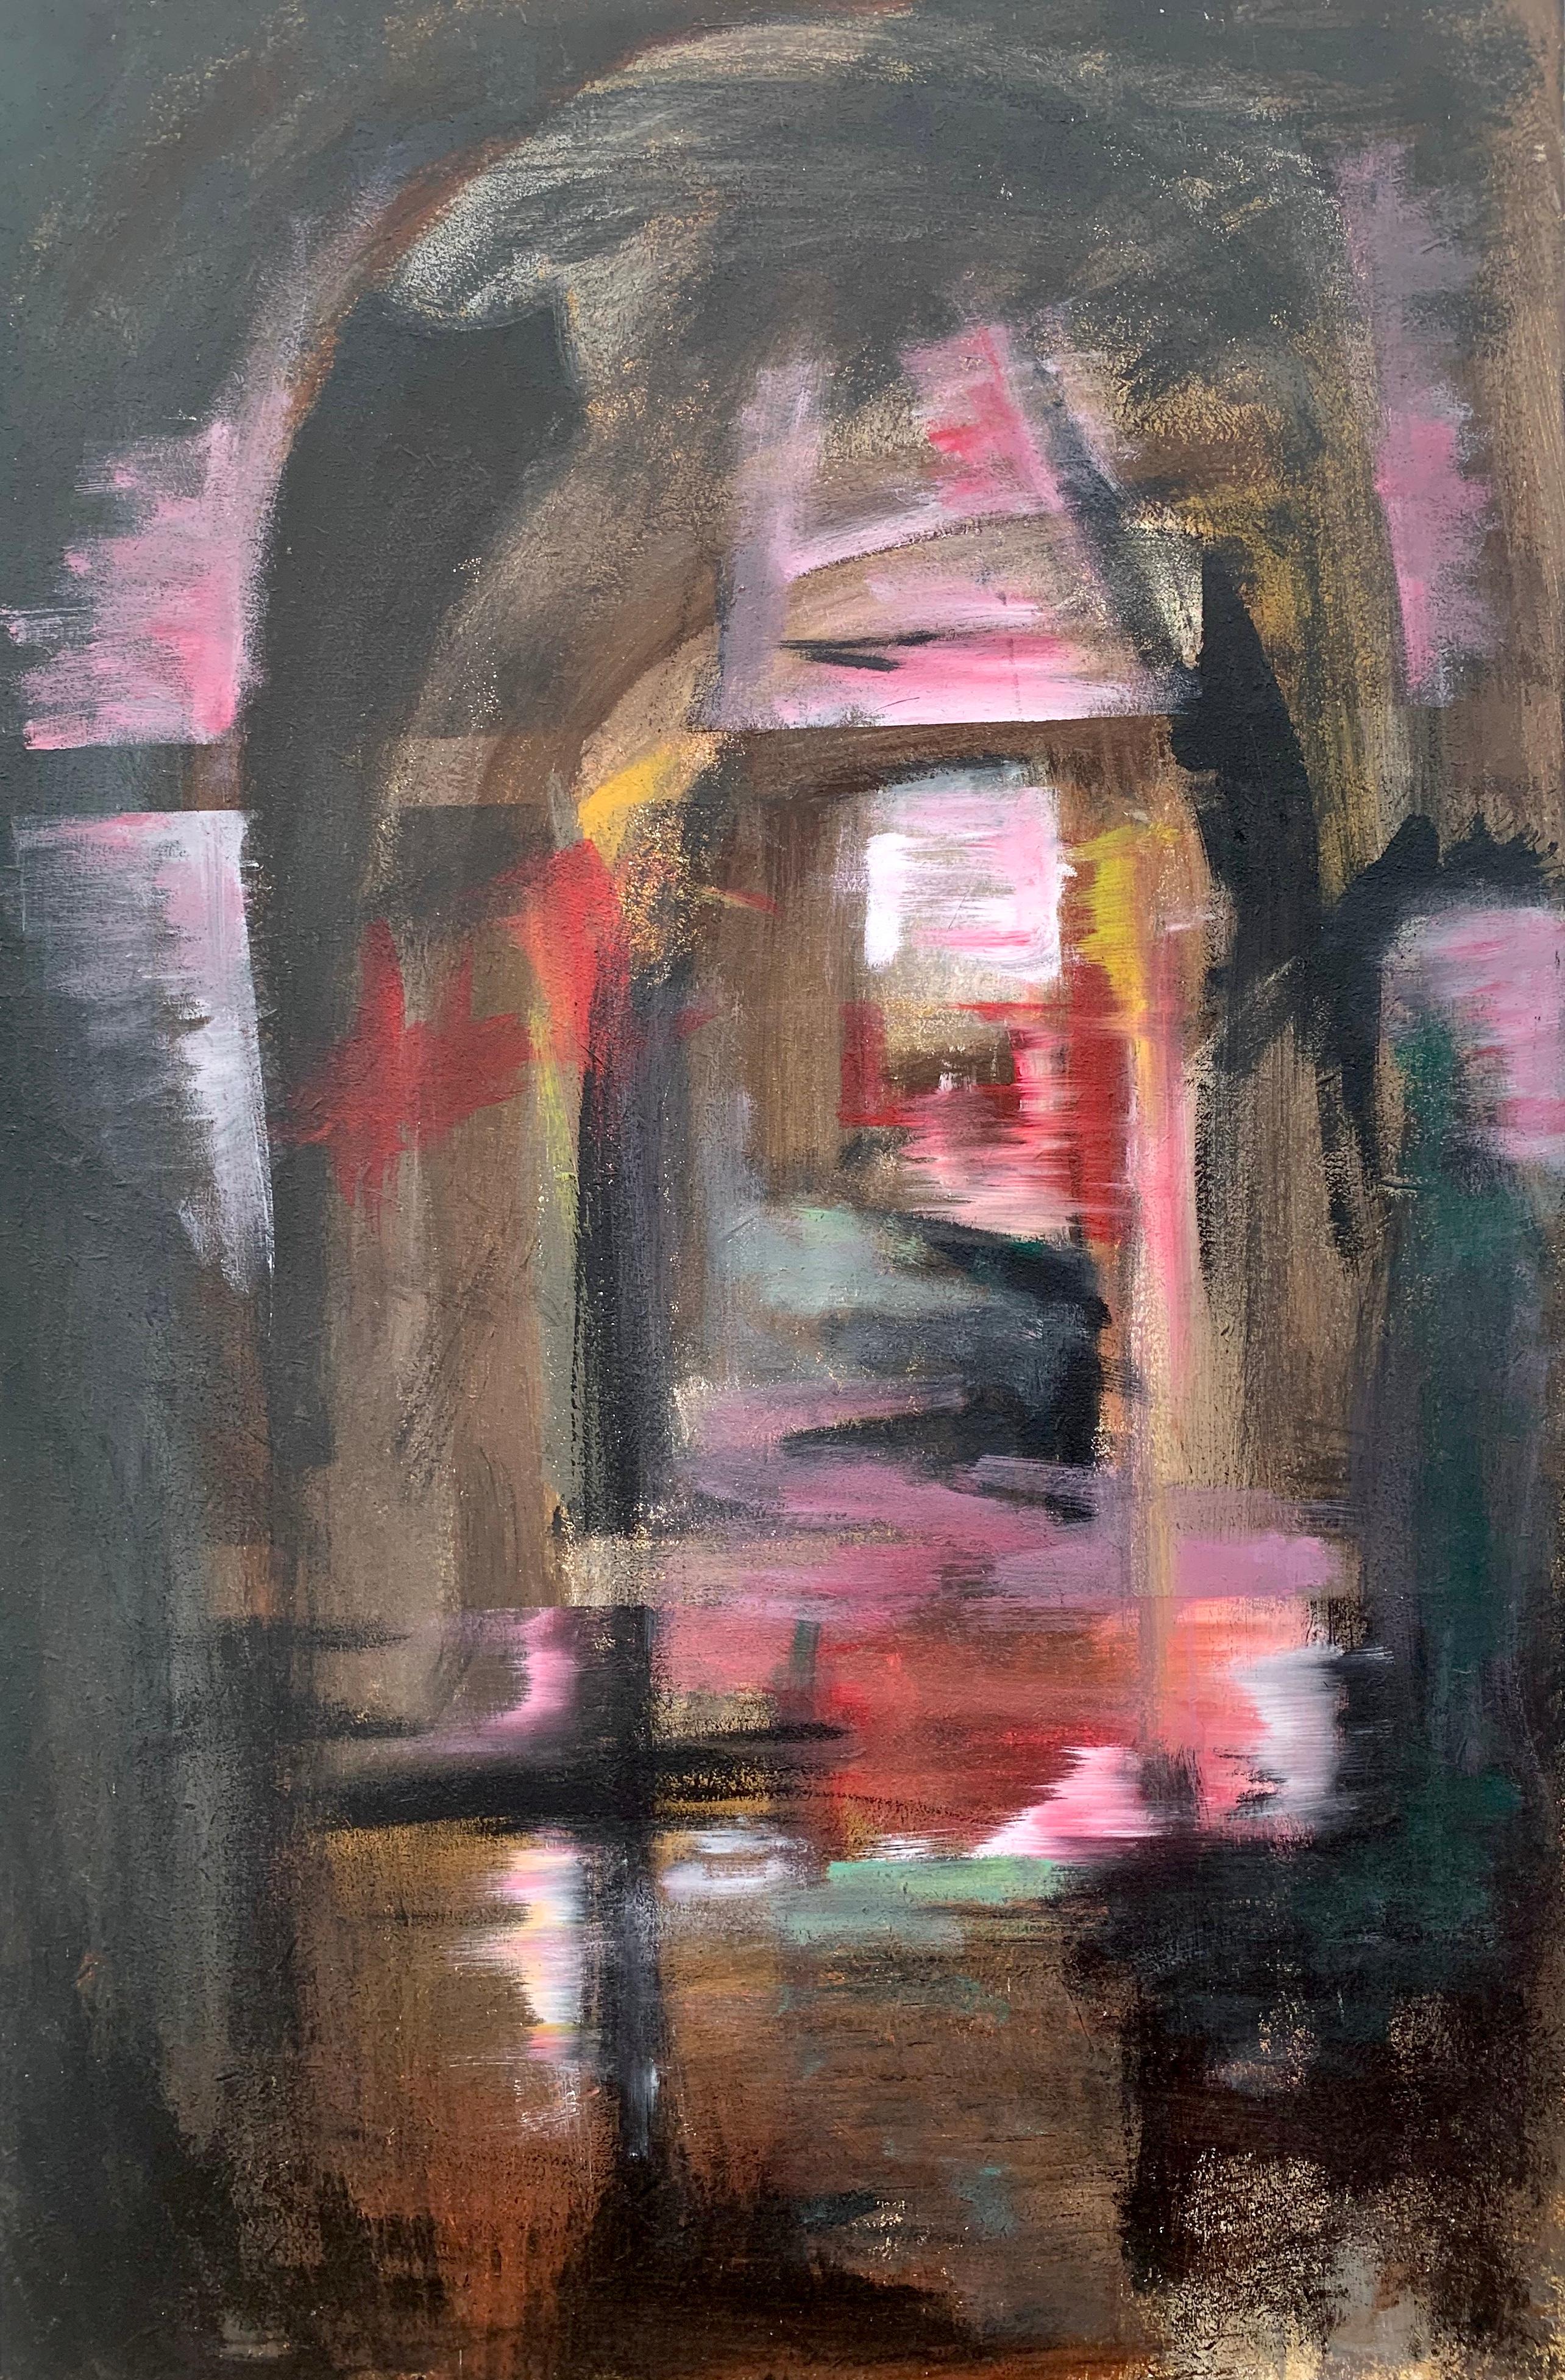 Railway Arches & Bridges Abstract Expressionist Art by Modern British Painter For Sale 2